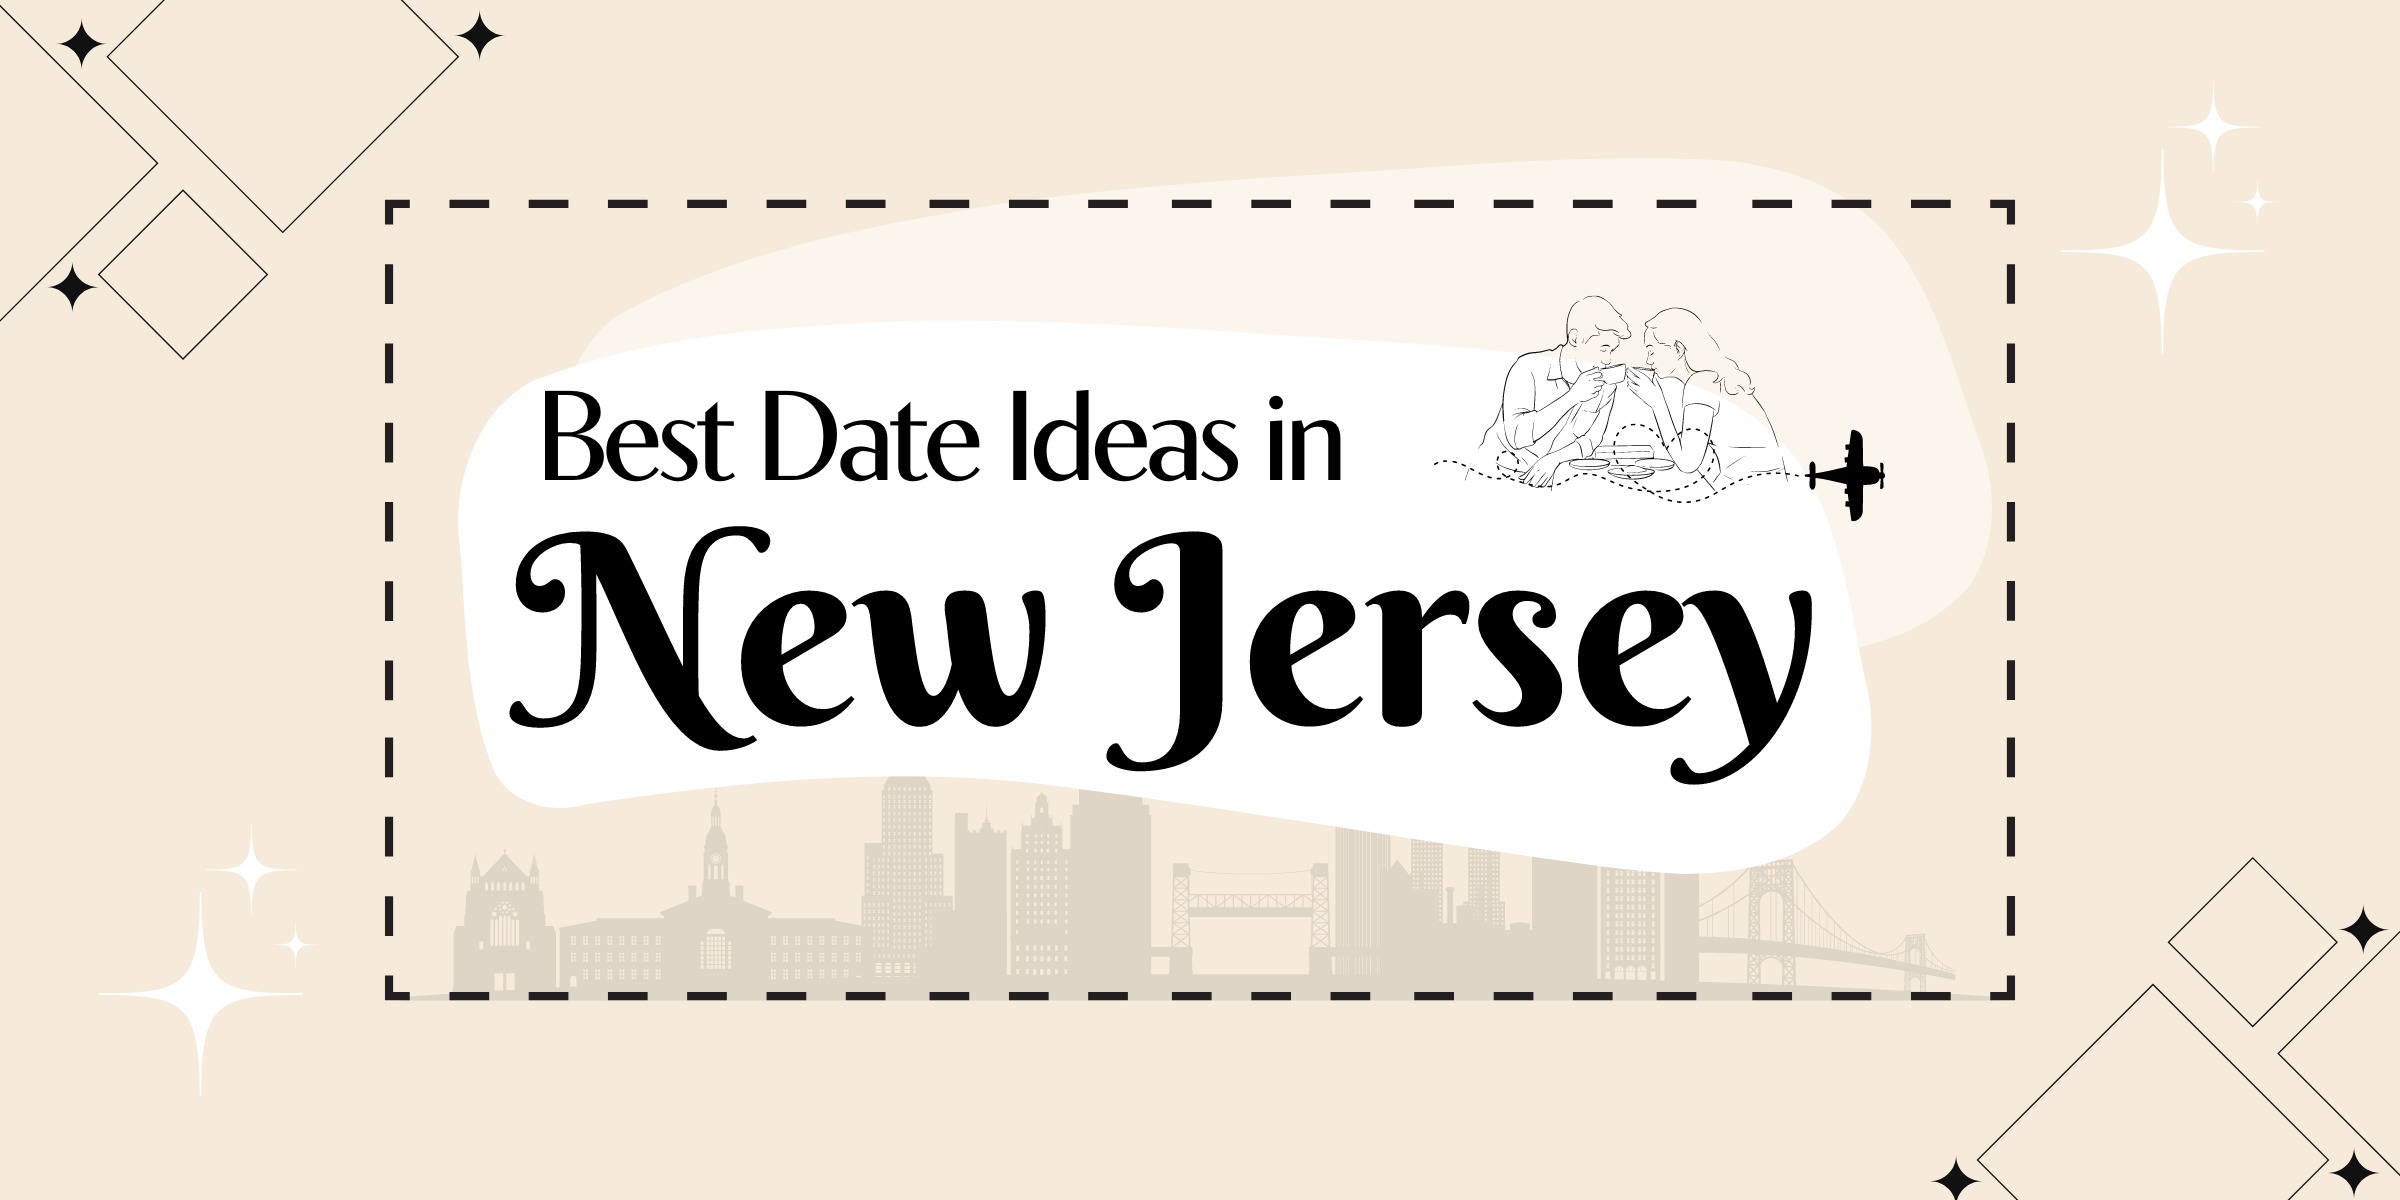 Not sure where to go for your next date in the Garden State? Check out our guide to the top date ideas in NJ!